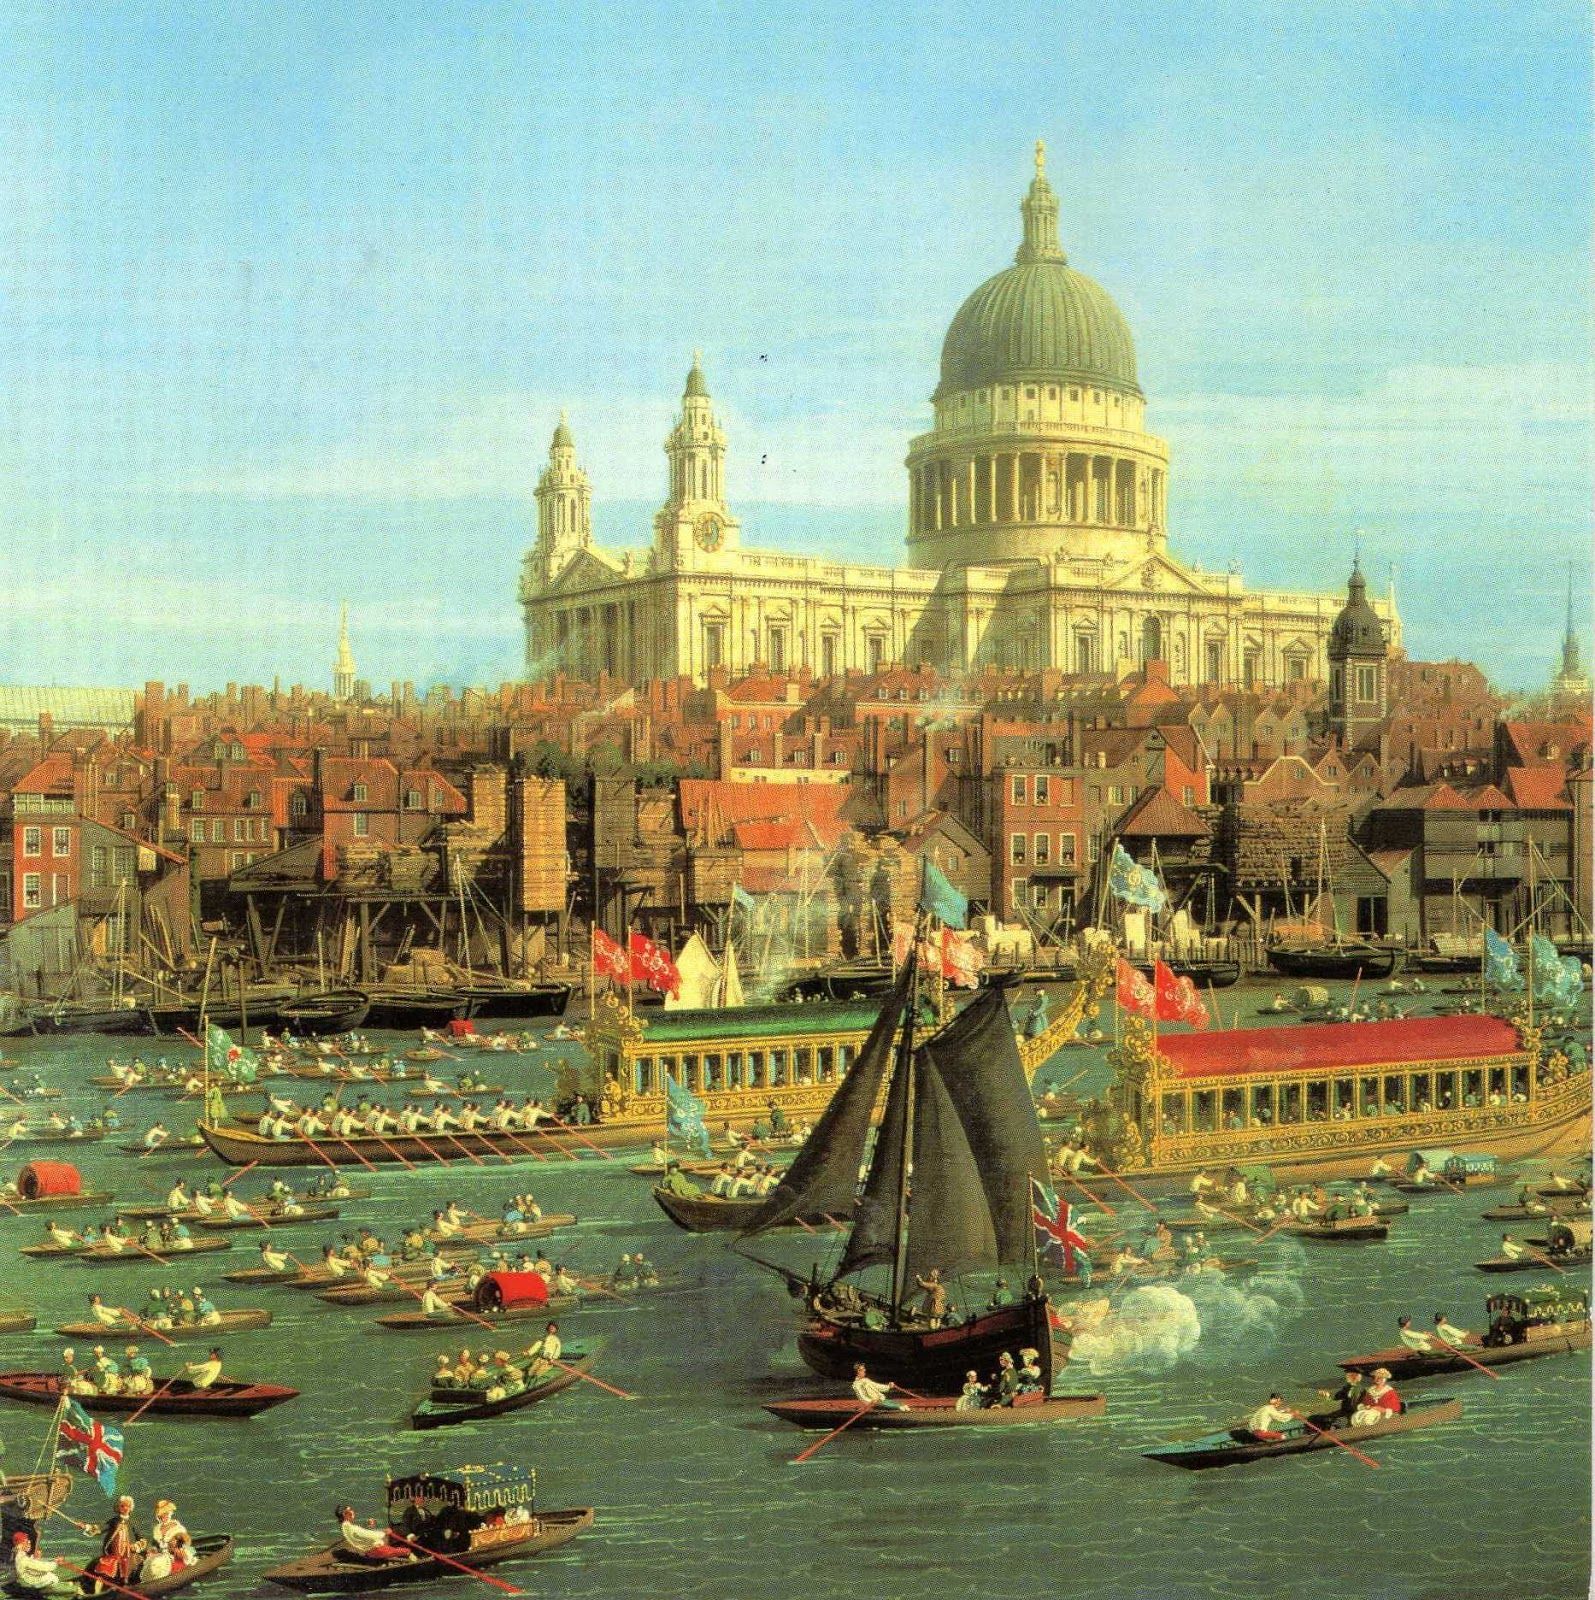 Canaletto. London painting, European paintings, Landscape paintings